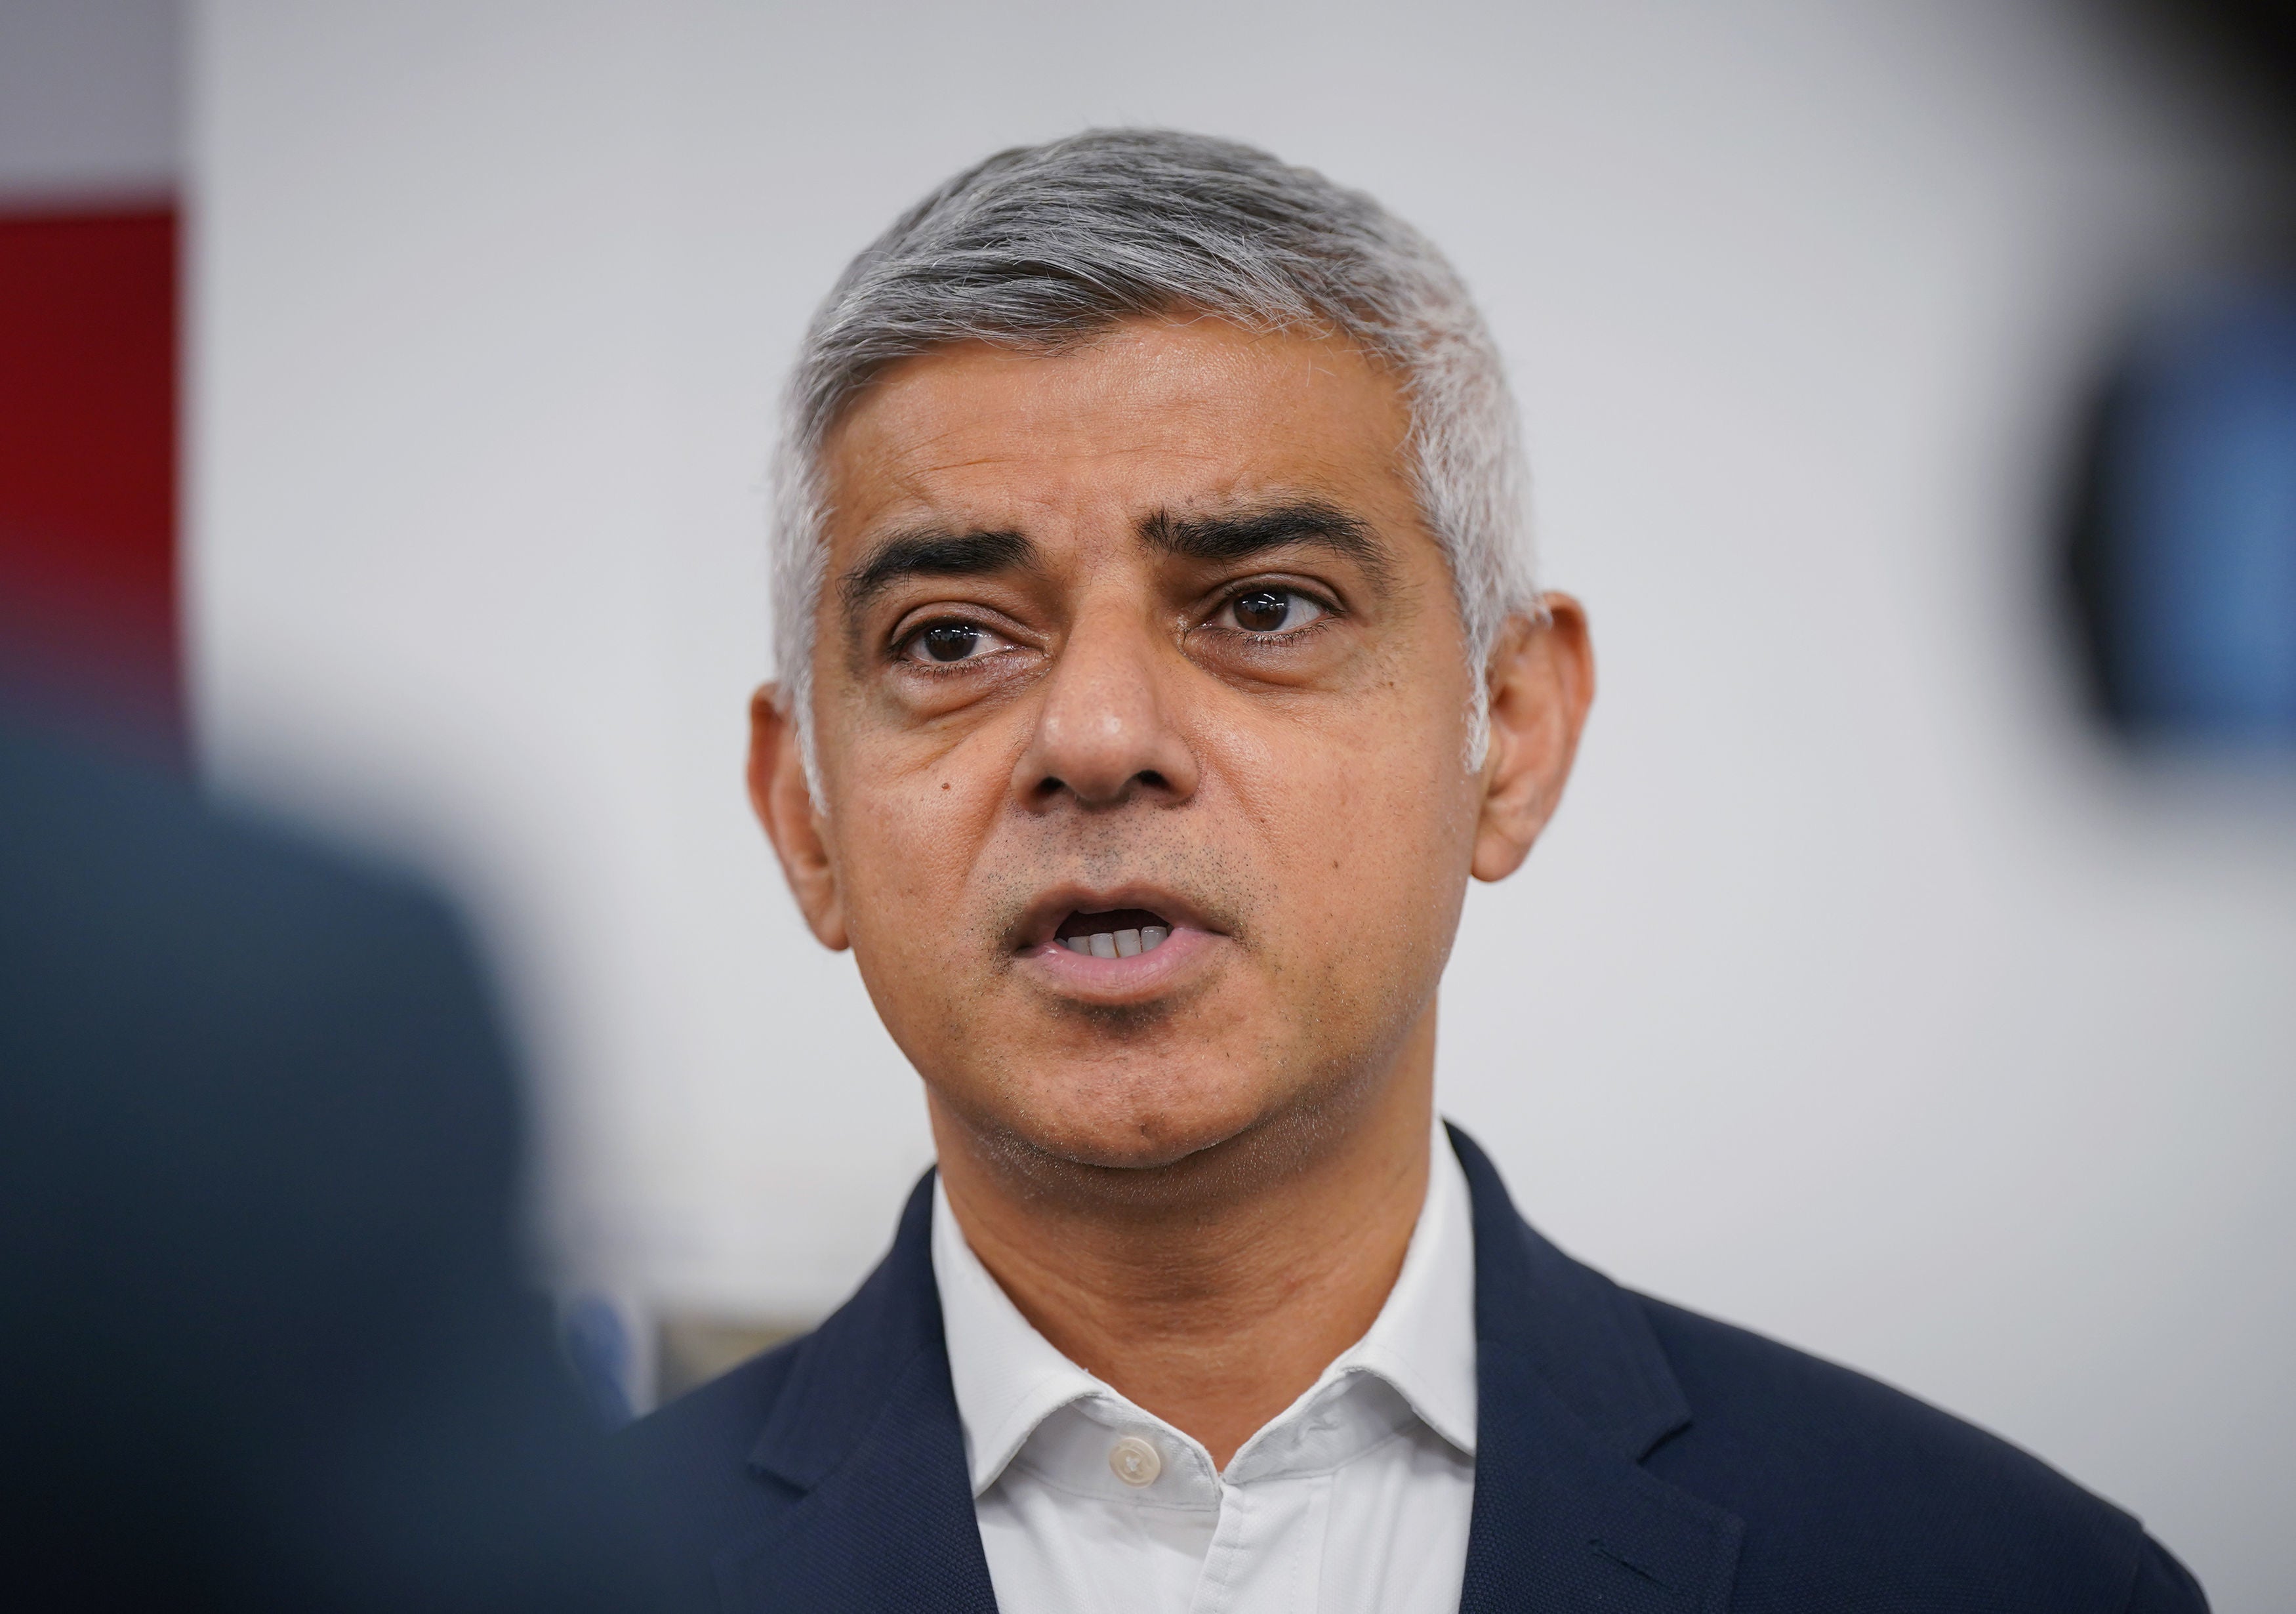 Sadiq Khan said the way to address violent crime is to ‘tackle the infection before it spreads’